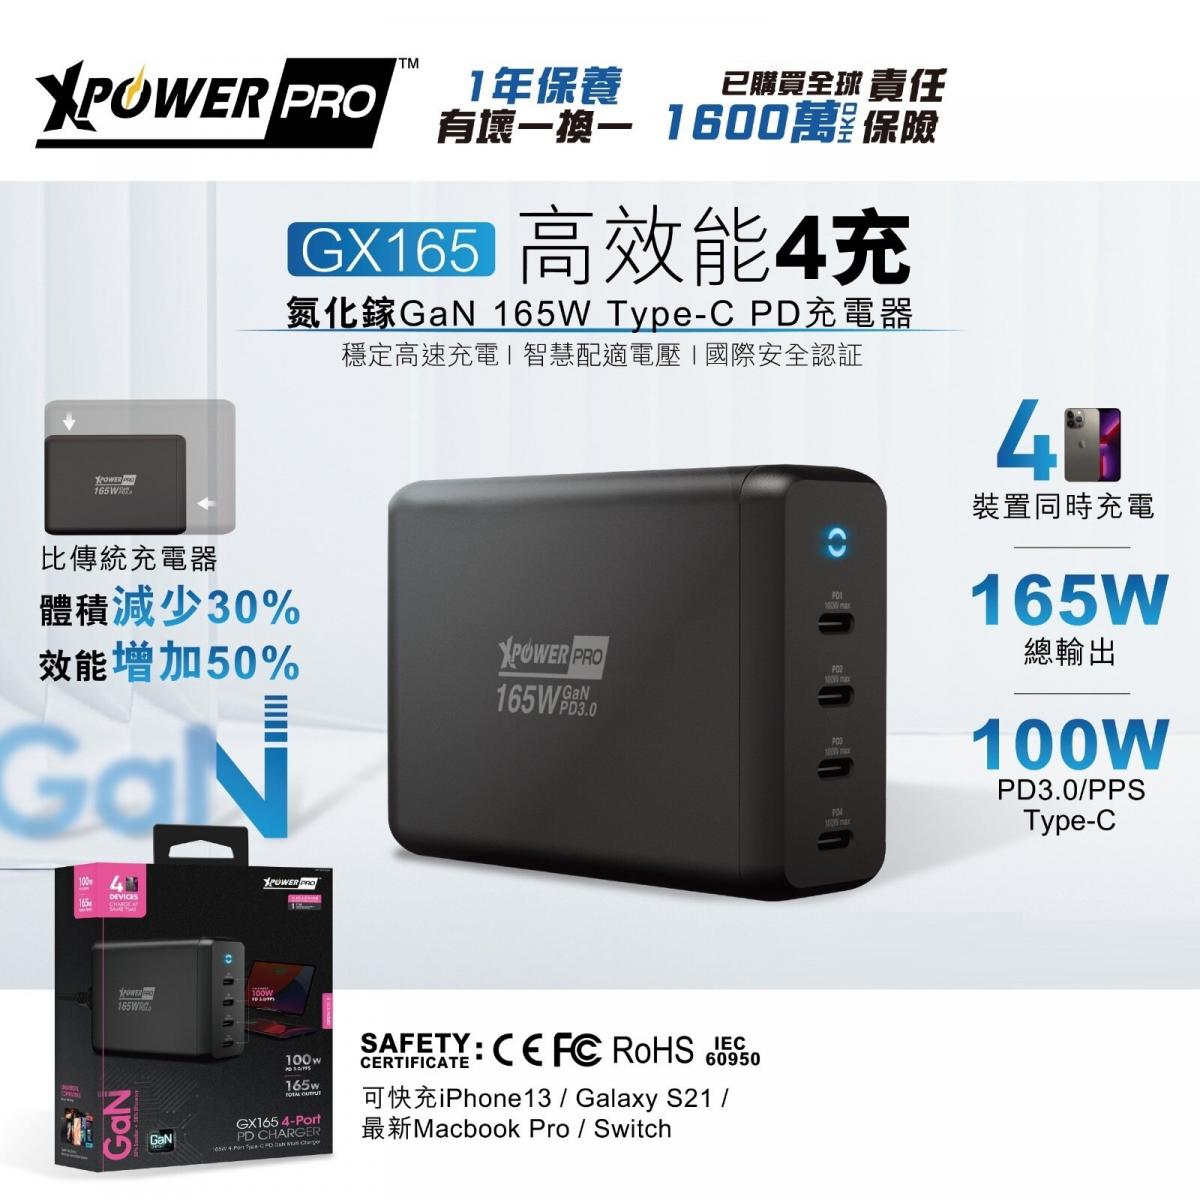 Xpower - XpowerPro GX165 165W GaN smart TYPE-C charger | PD fast charging | 100W single charge | Desktop type | Type-C charger